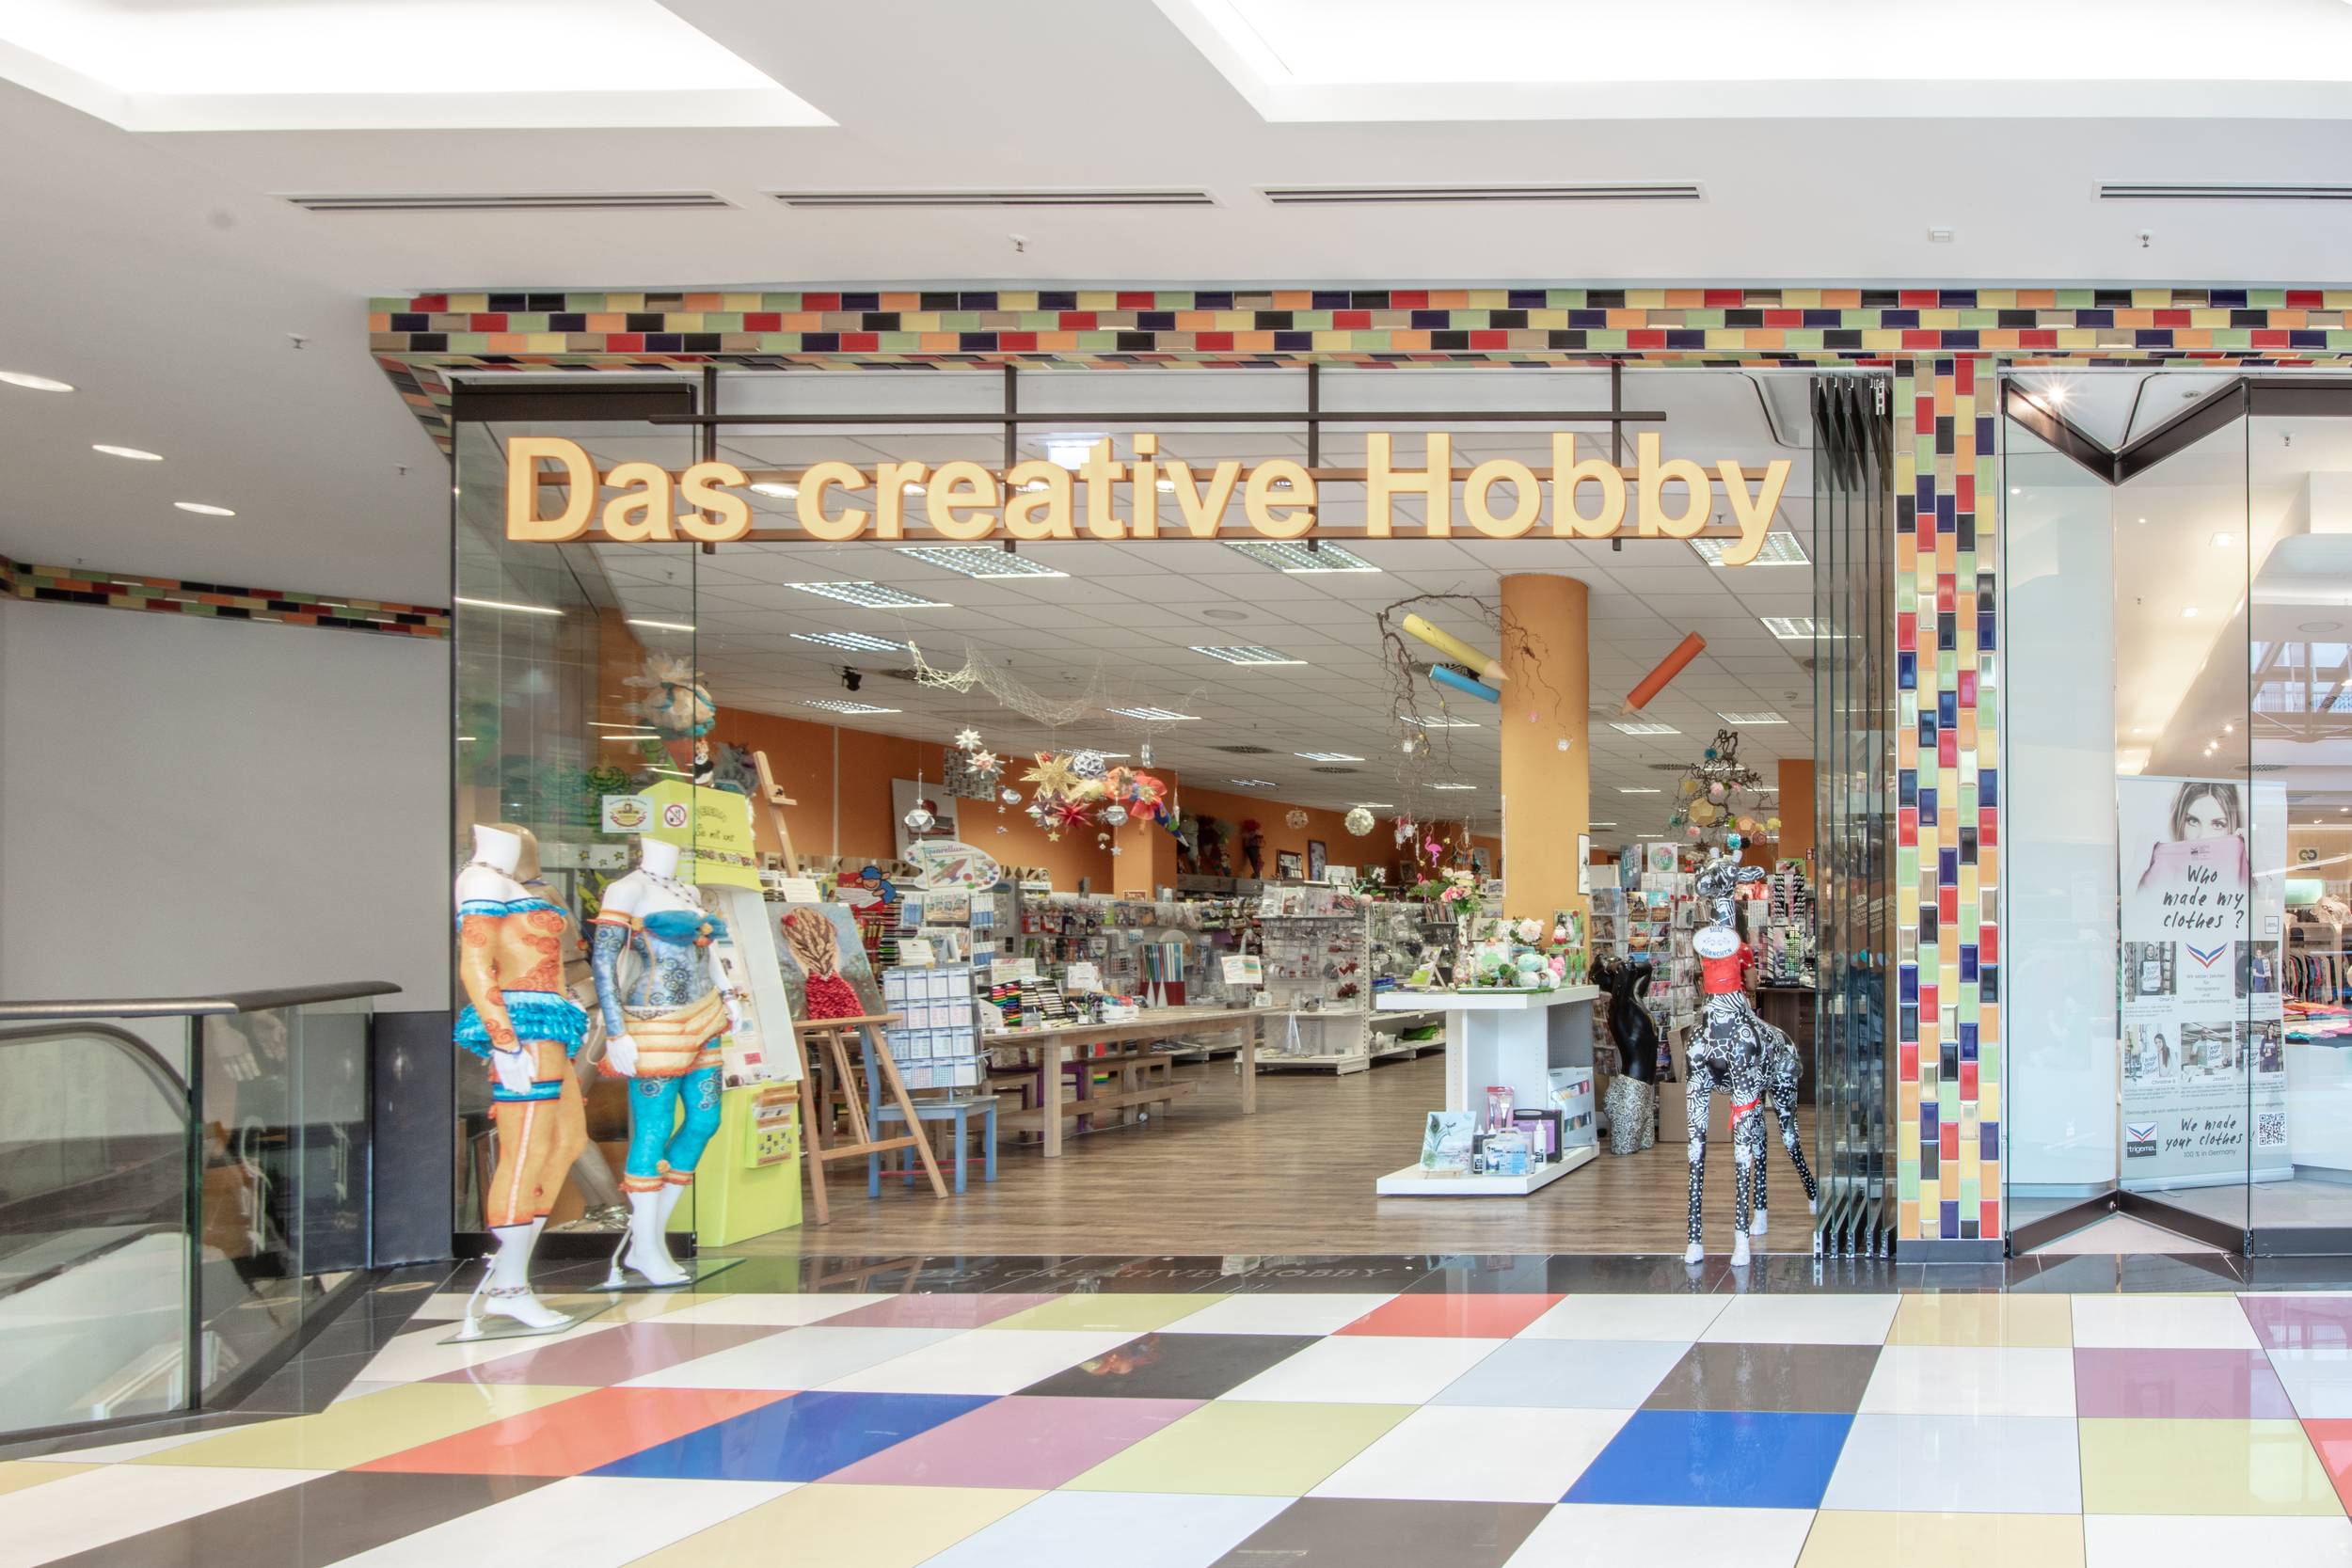 Das creative Hobby at the Mall of Berlin